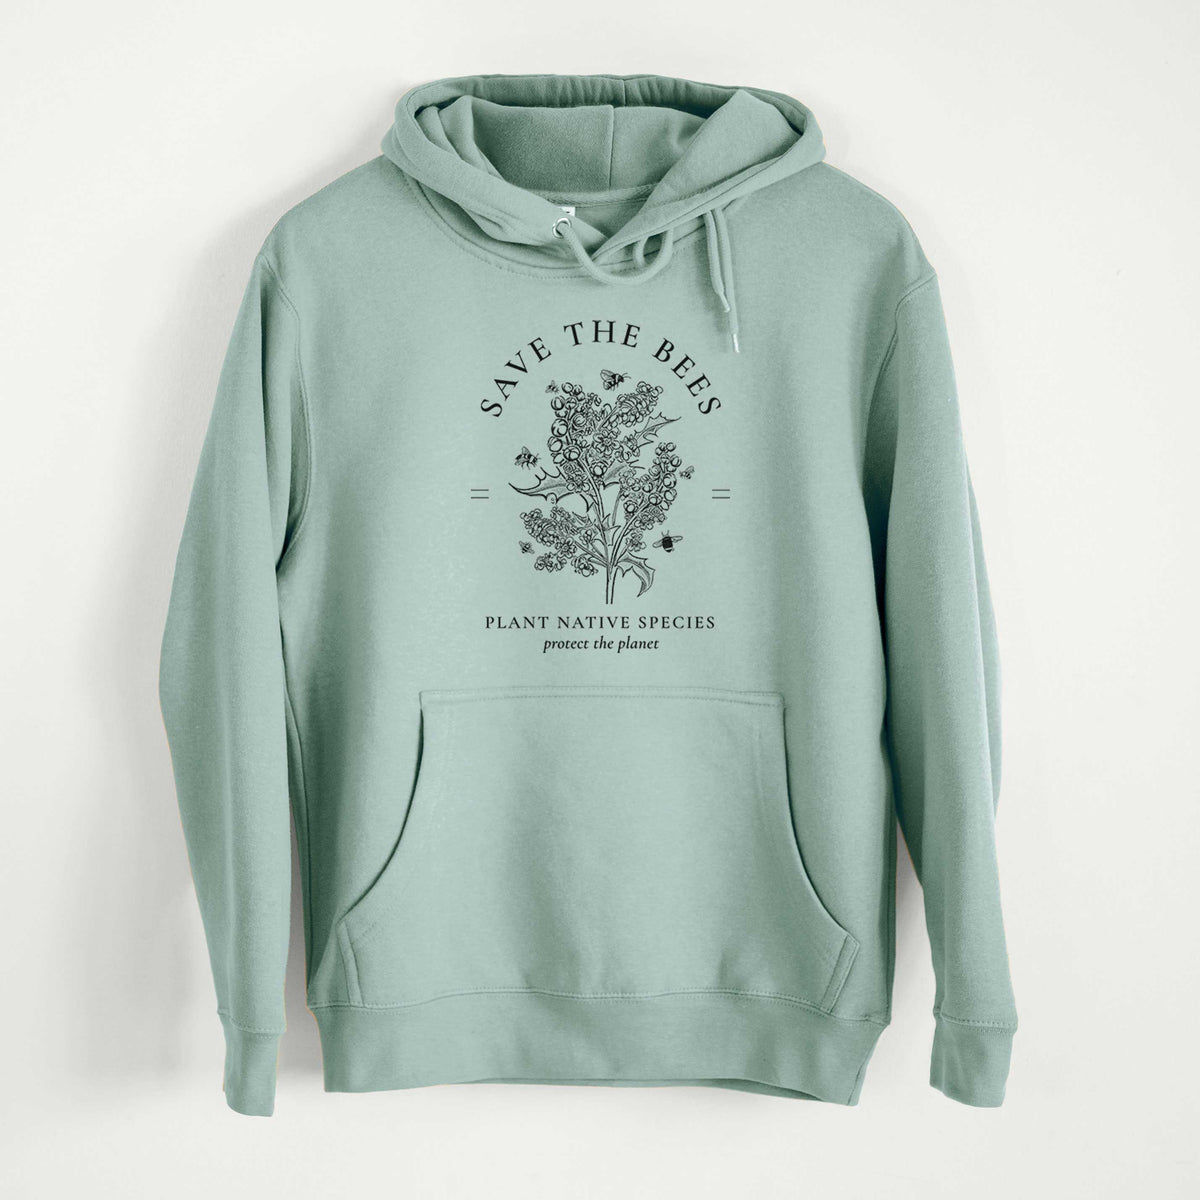 Save the Bees - Plant Native Species  - Mid-Weight Unisex Premium Blend Hoodie